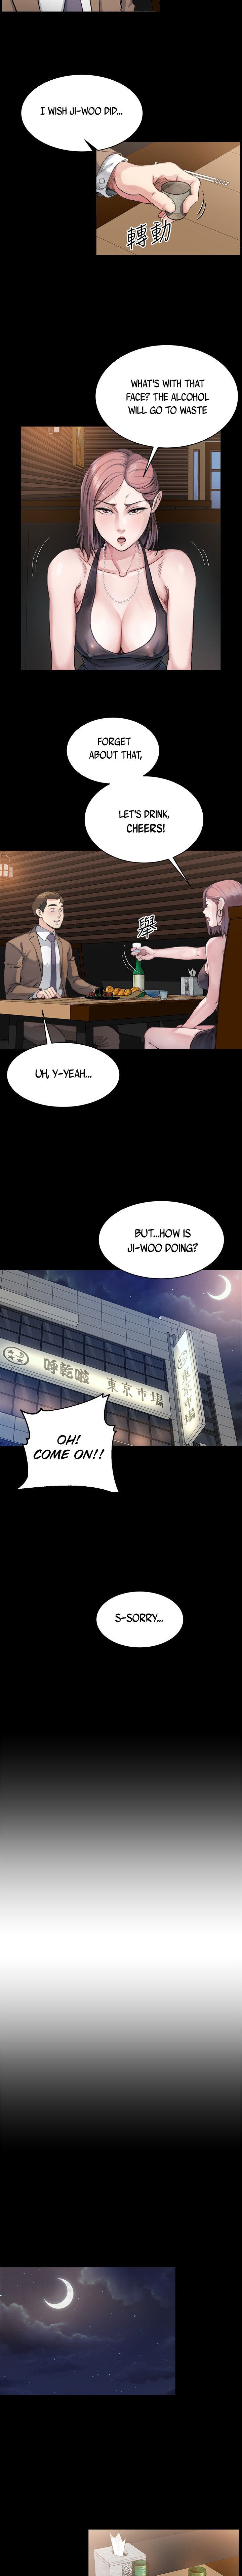 cheer-up-brother-in-law-chap-4-3